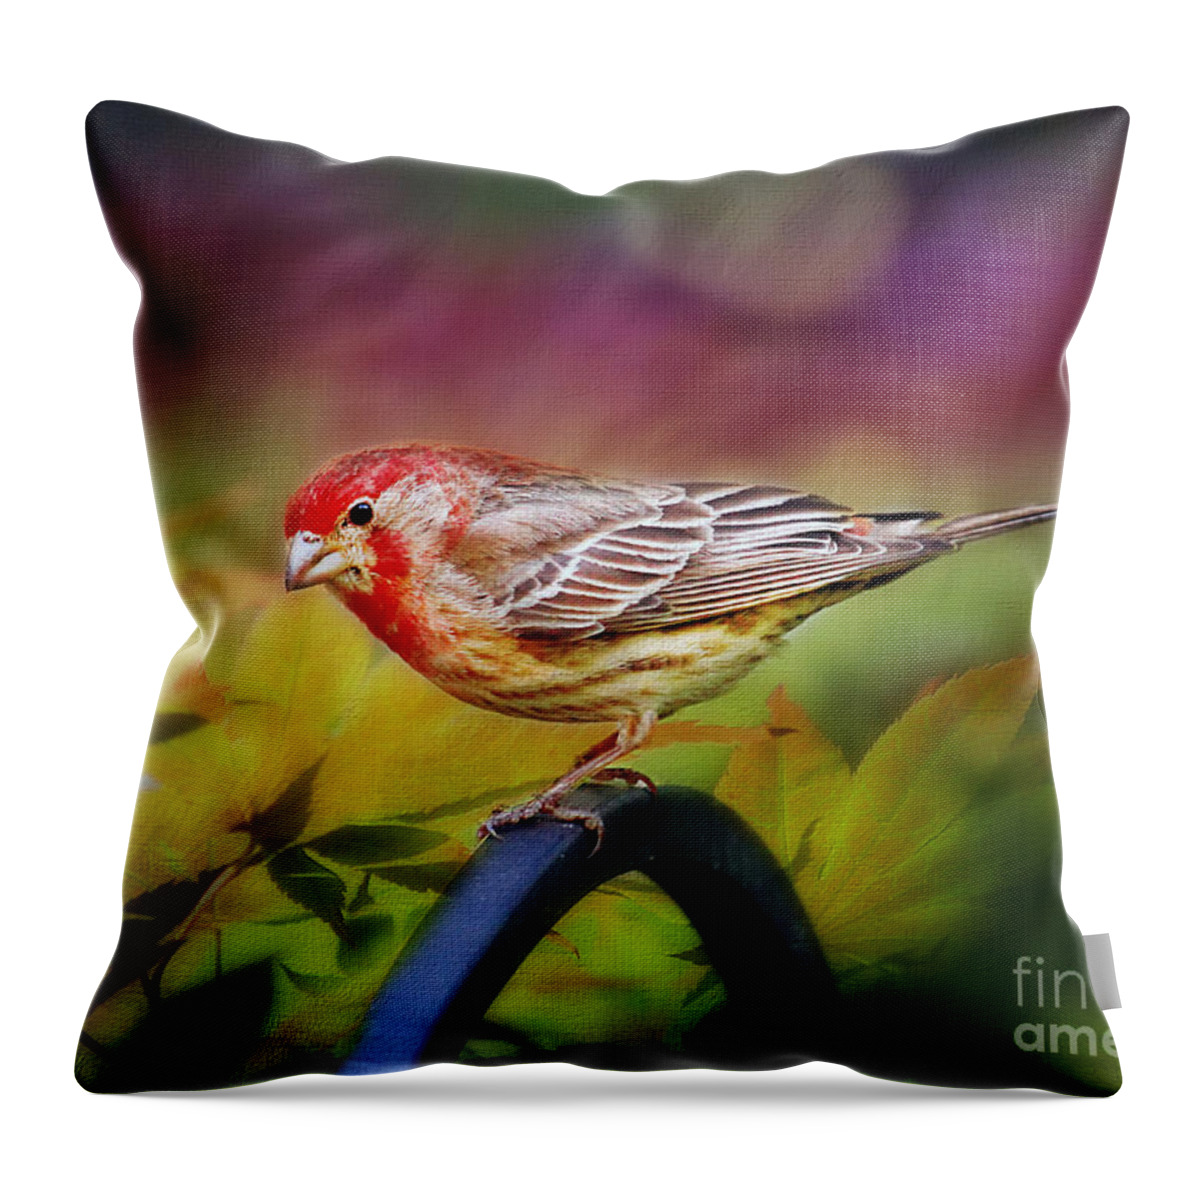 Leaves Throw Pillow featuring the photograph Red Finch by Darren Fisher